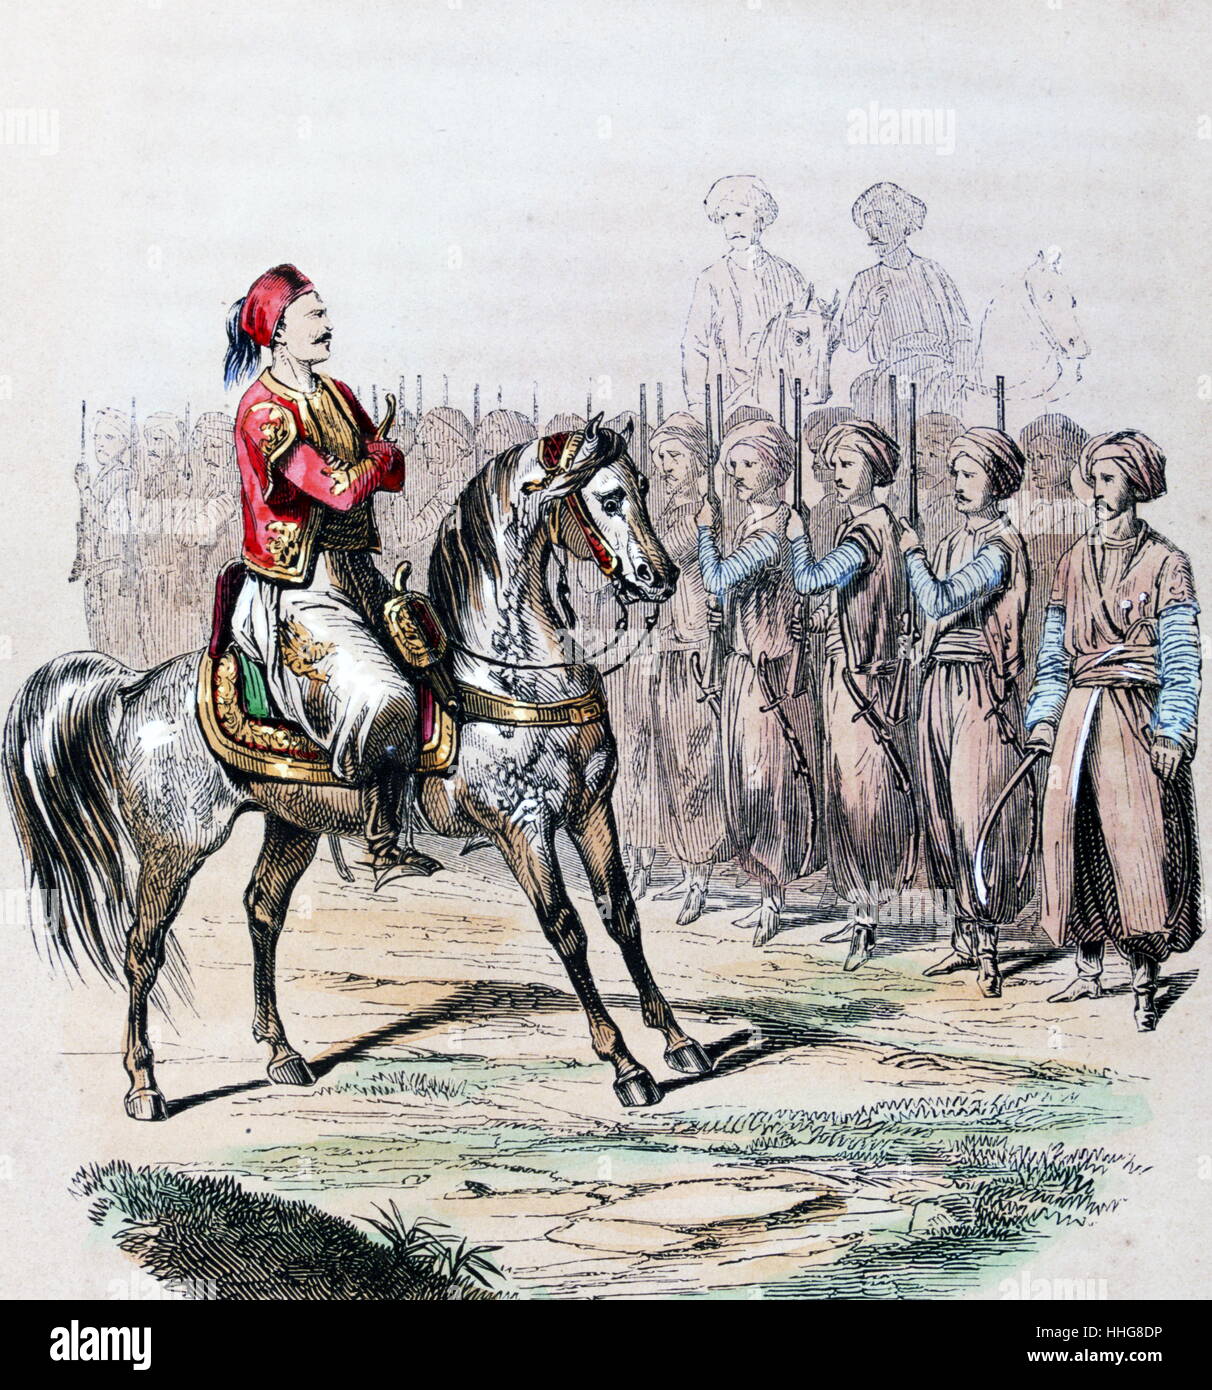 Suleiman Pasha al-Faransawi (Suleiman Pasha 1788 – 1860) addresses Mamaluke, Egyptian troops. 'You are clumsy, he told the Mamelukes: Get ready weapons! Fire!'. Pasha was born Joseph Anthelme Seve; a French-born Egyptian commander. Watercolour by the French painter Jean-Adolphe Beaucé (1818 - 1875). Stock Photo